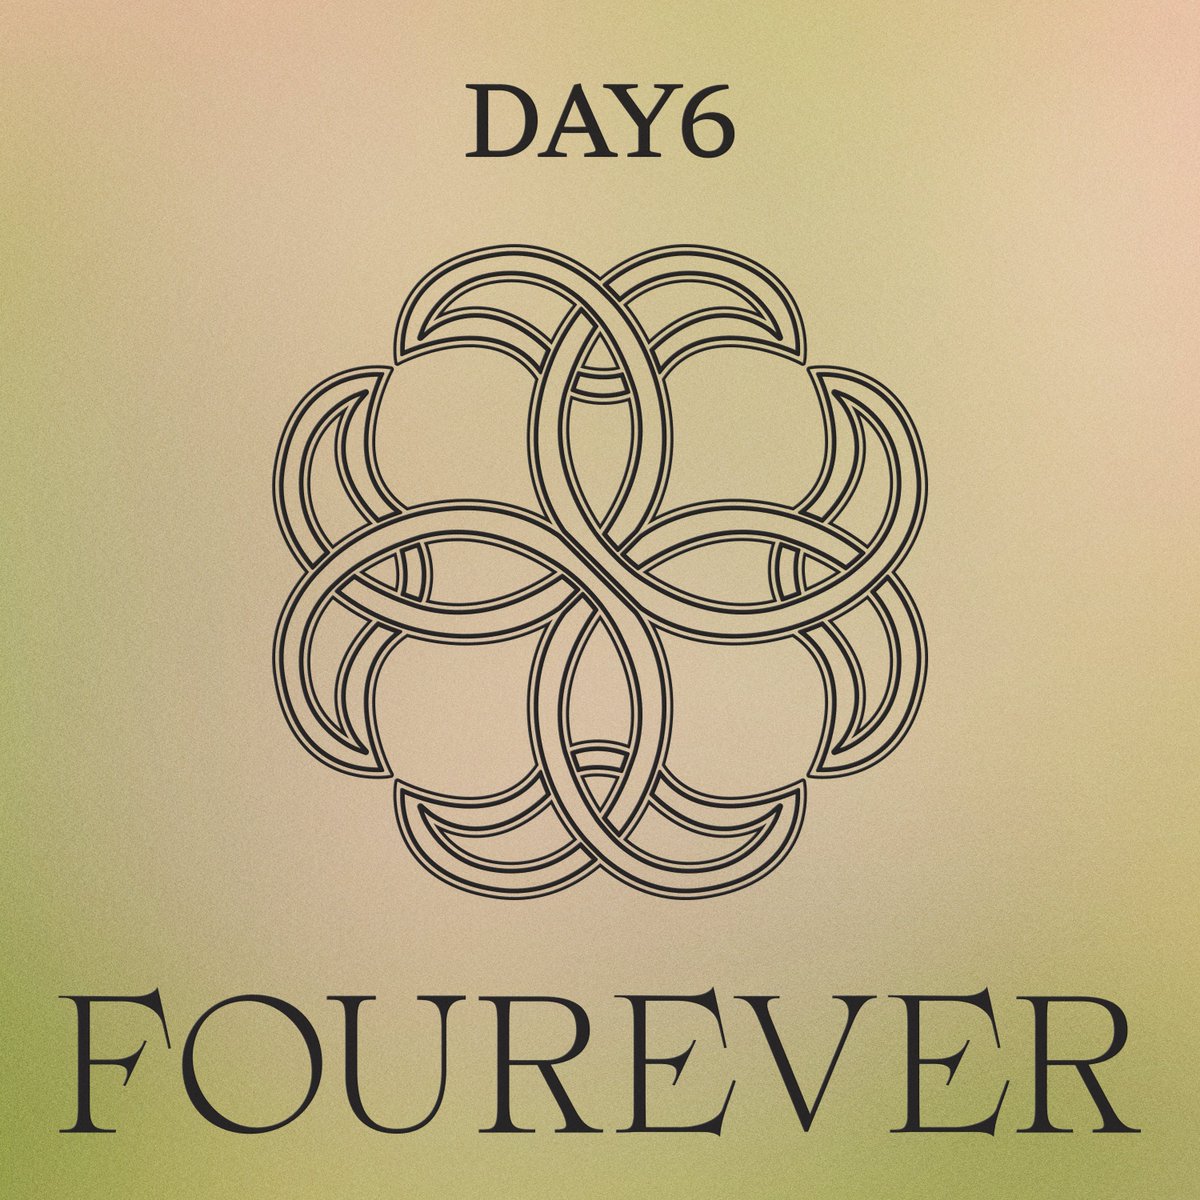 DAY6 8th Mini Album ＜Fourever＞ Released Online Melon bit.ly/43jh7SJ Genie bit.ly/3IJAHy5 Bugs bit.ly/3IGN65N FLO bit.ly/4chqVAJ #DAY6 #데이식스 #Fourever #Welcome_to_the_Show